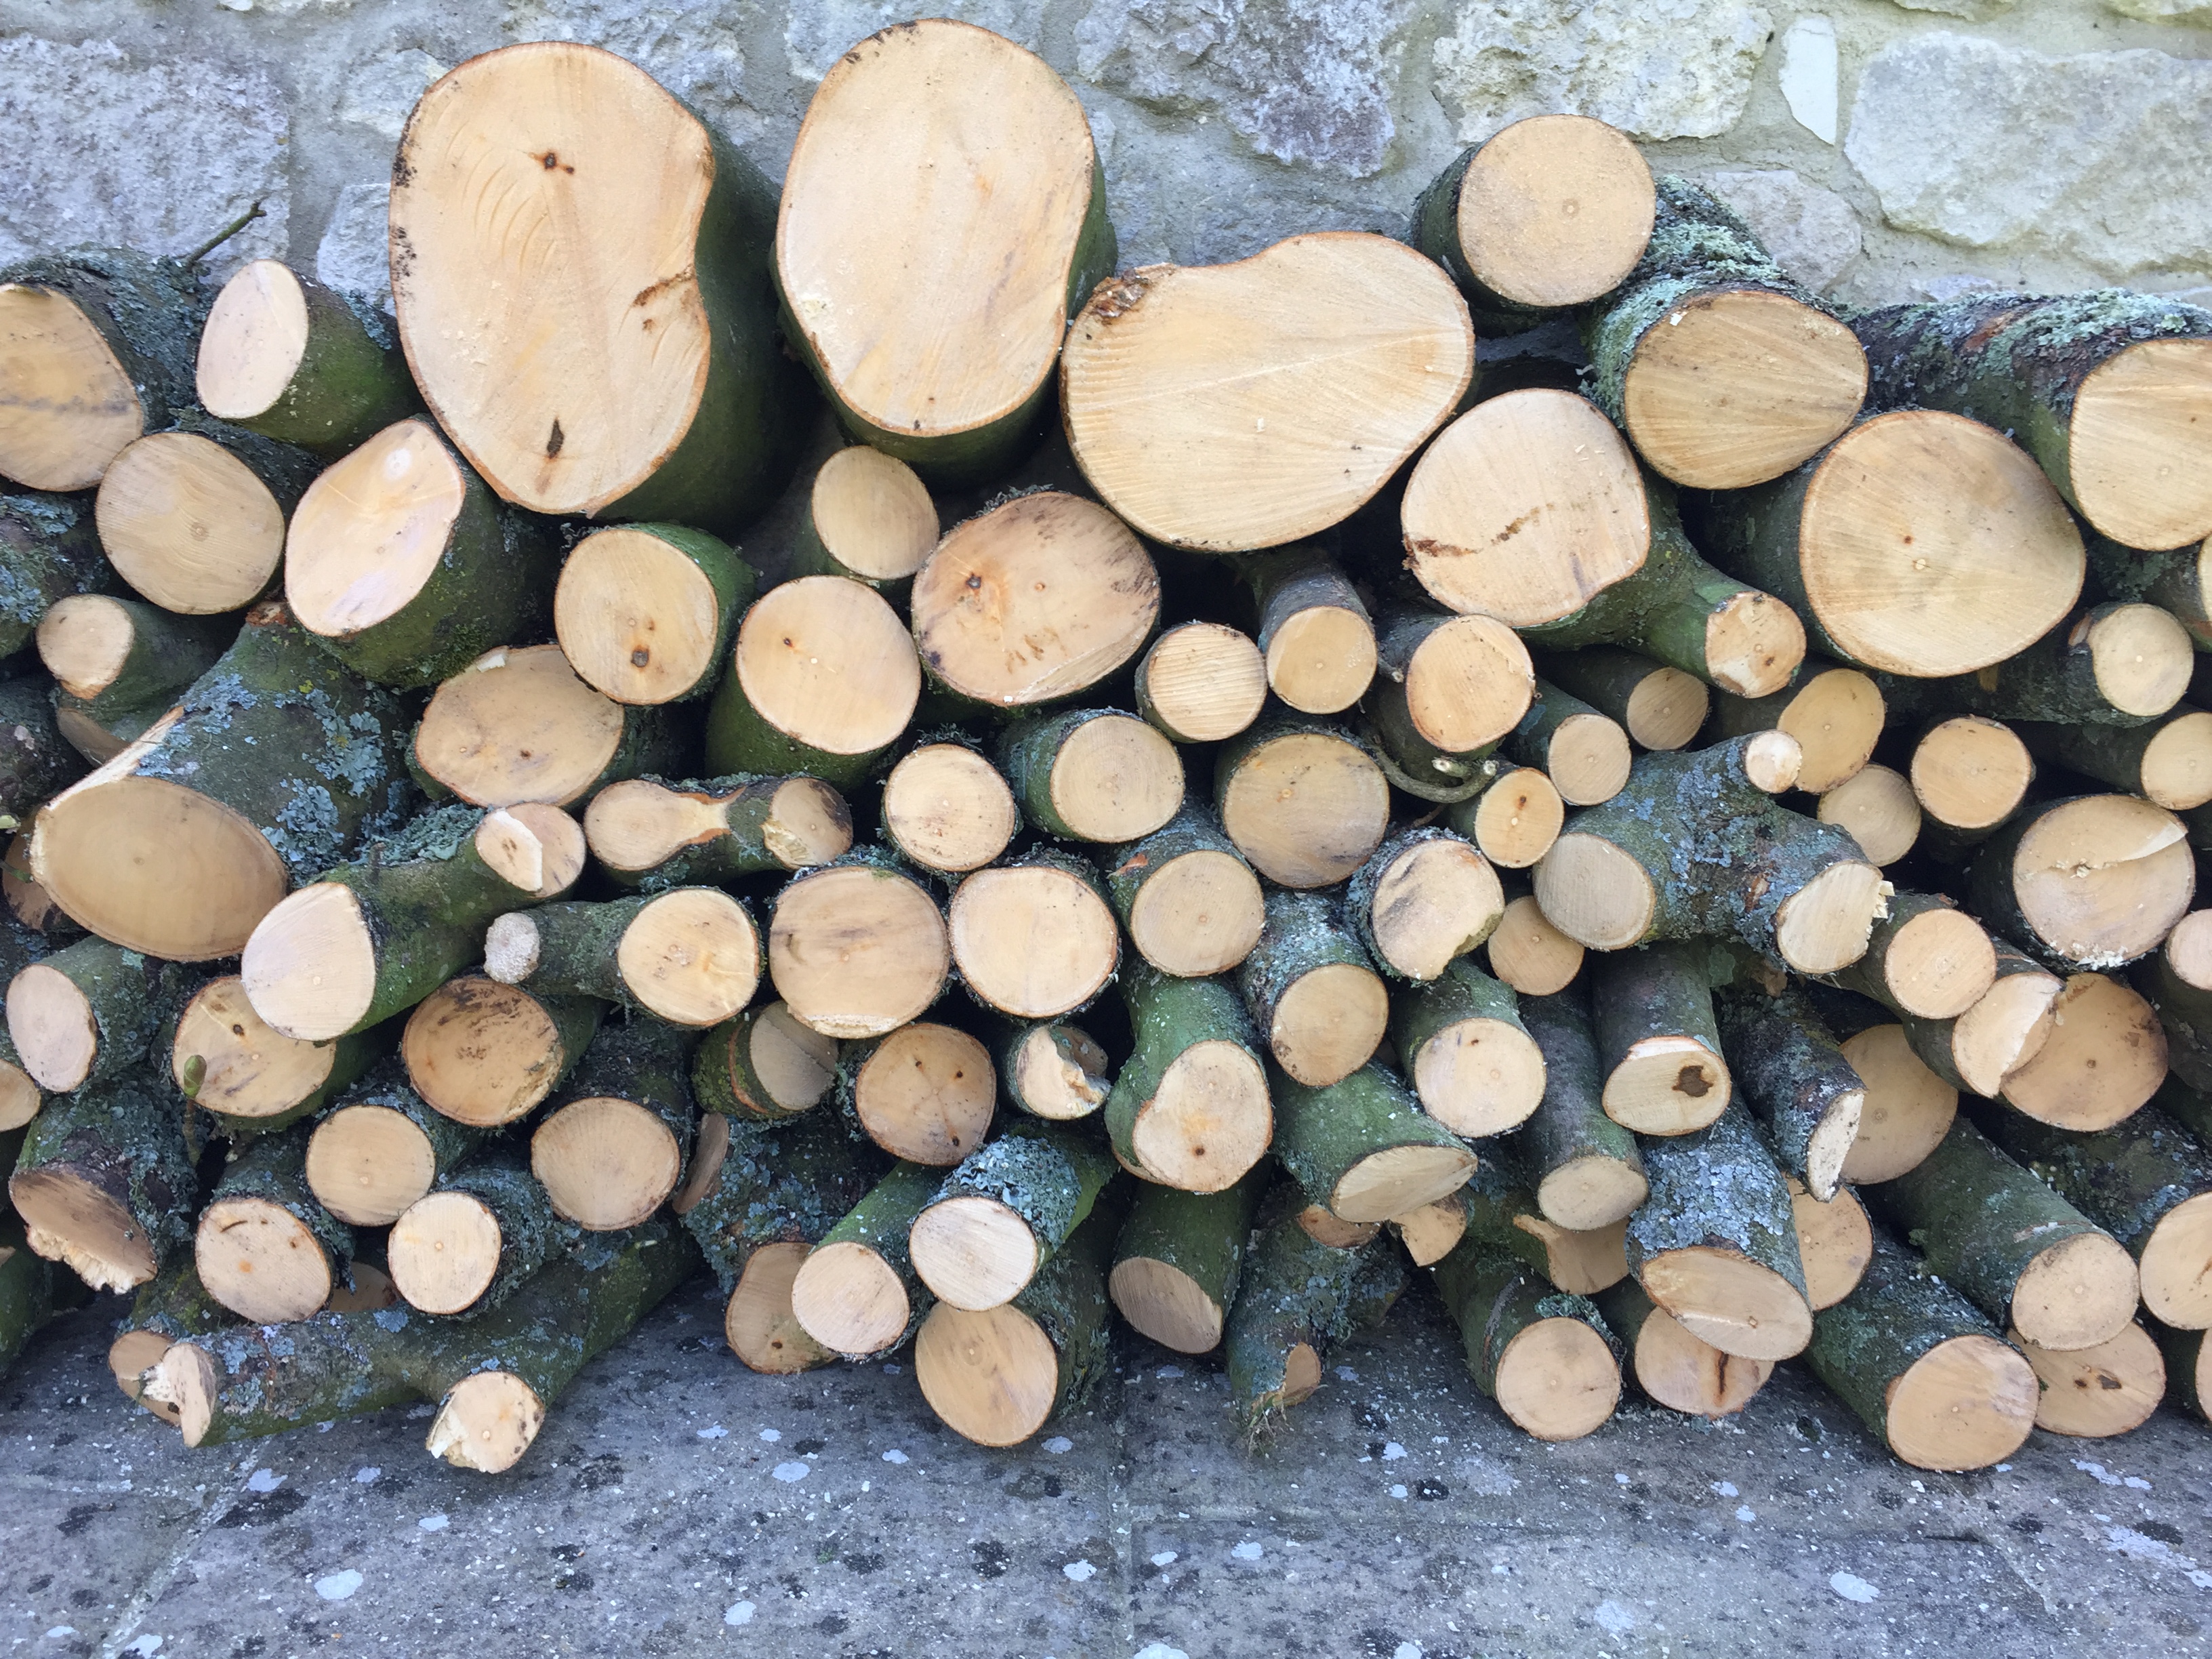 Dorset Treeworx Ltd | Weymouth Tree Surgeon. Dorchester Tree Surgeon, Portland Tree Surgeon, Bridport tree surgeon, portesham tree surgeon | Dorset Treeworx Gallery Page - photo of a stack of tree wood, firewood, logs with cut ends showing making a beautiful pattern.